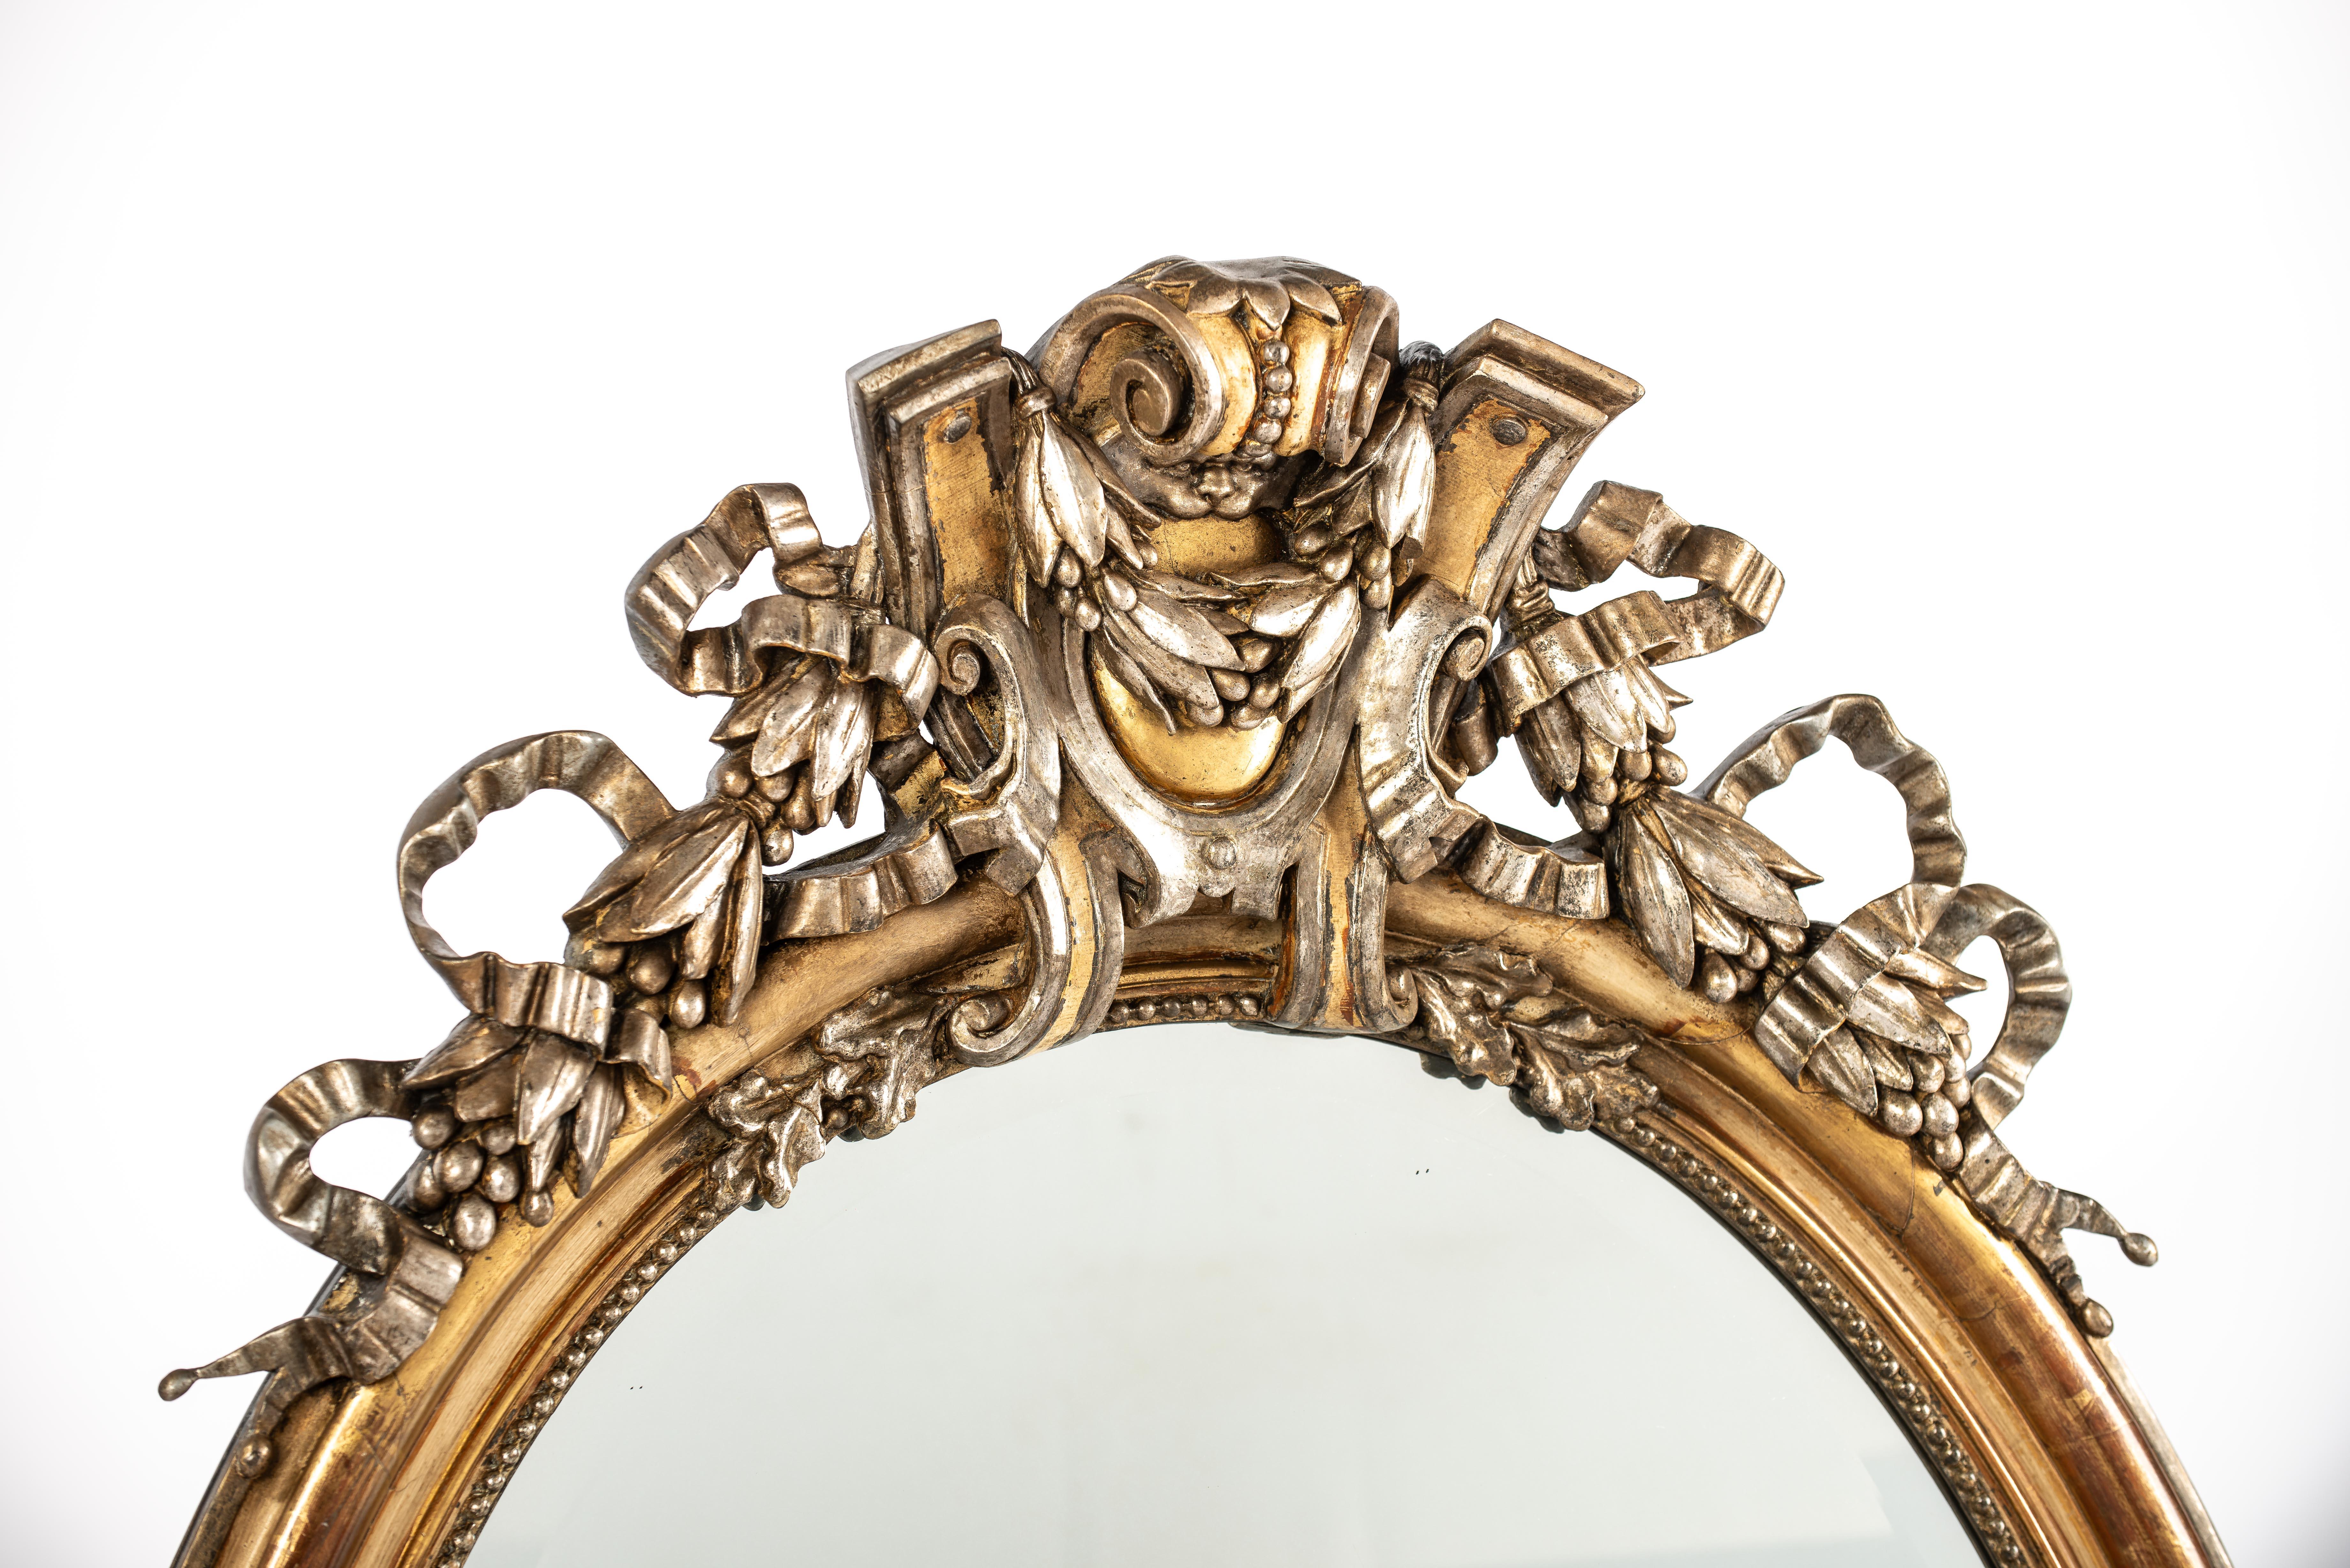 On offer here is a large antique oval mirror that was made in France in the second half of the 19th century, circa 1860. The mirror is decorated with beautiful ornaments with rich symbolic meaning. 
The top ornament on the mirror features a